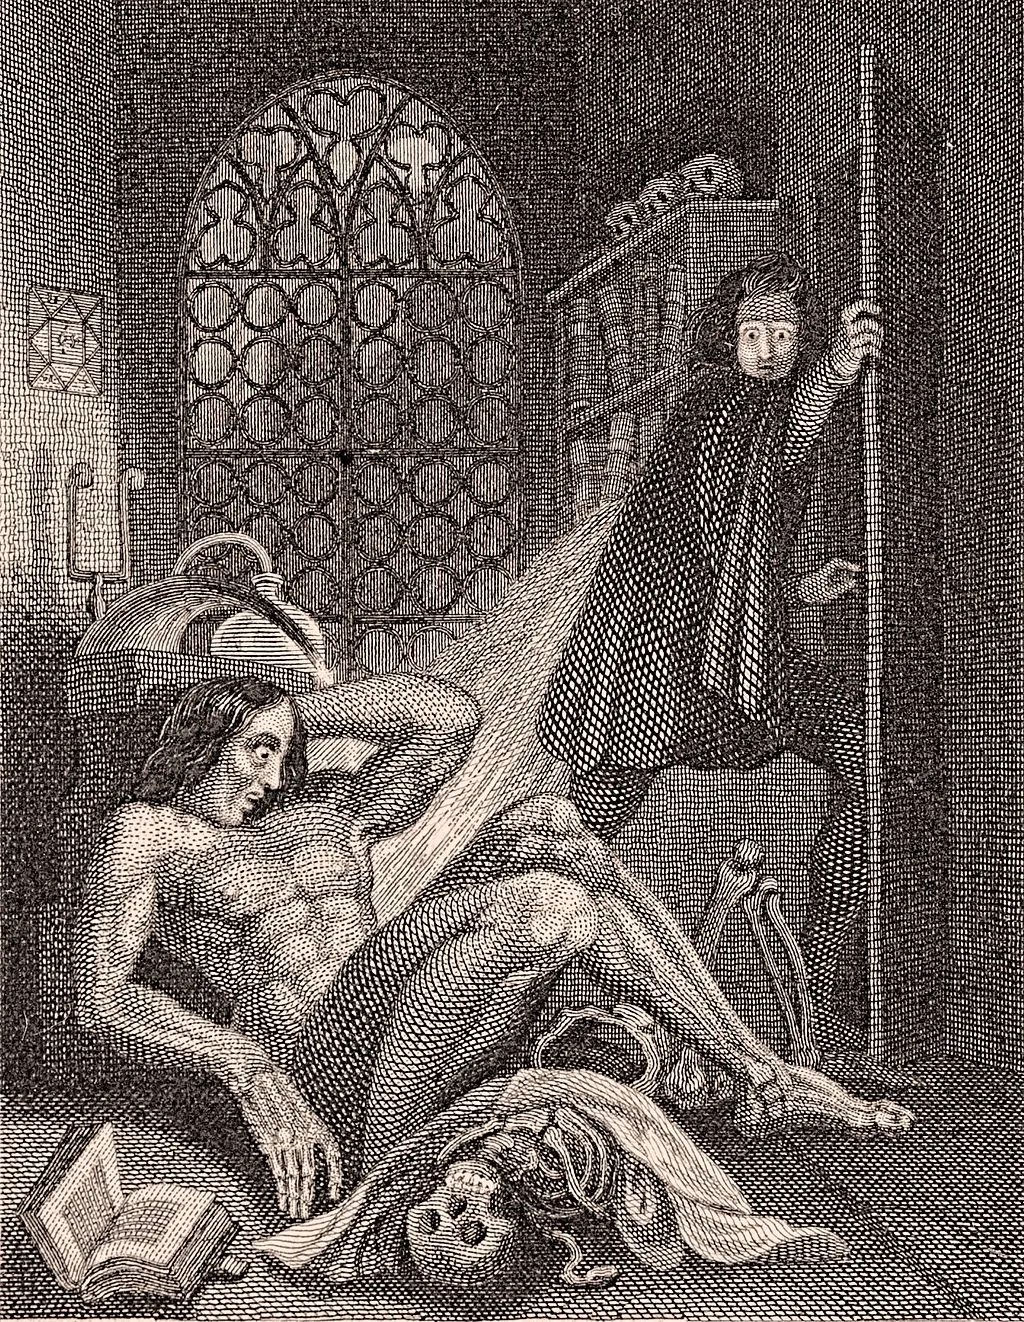 An engraving depicting Frankenstein's monster, a muscular newly formed humanoid, and a terrified Dr Frankenstein who appears to be running out of the room